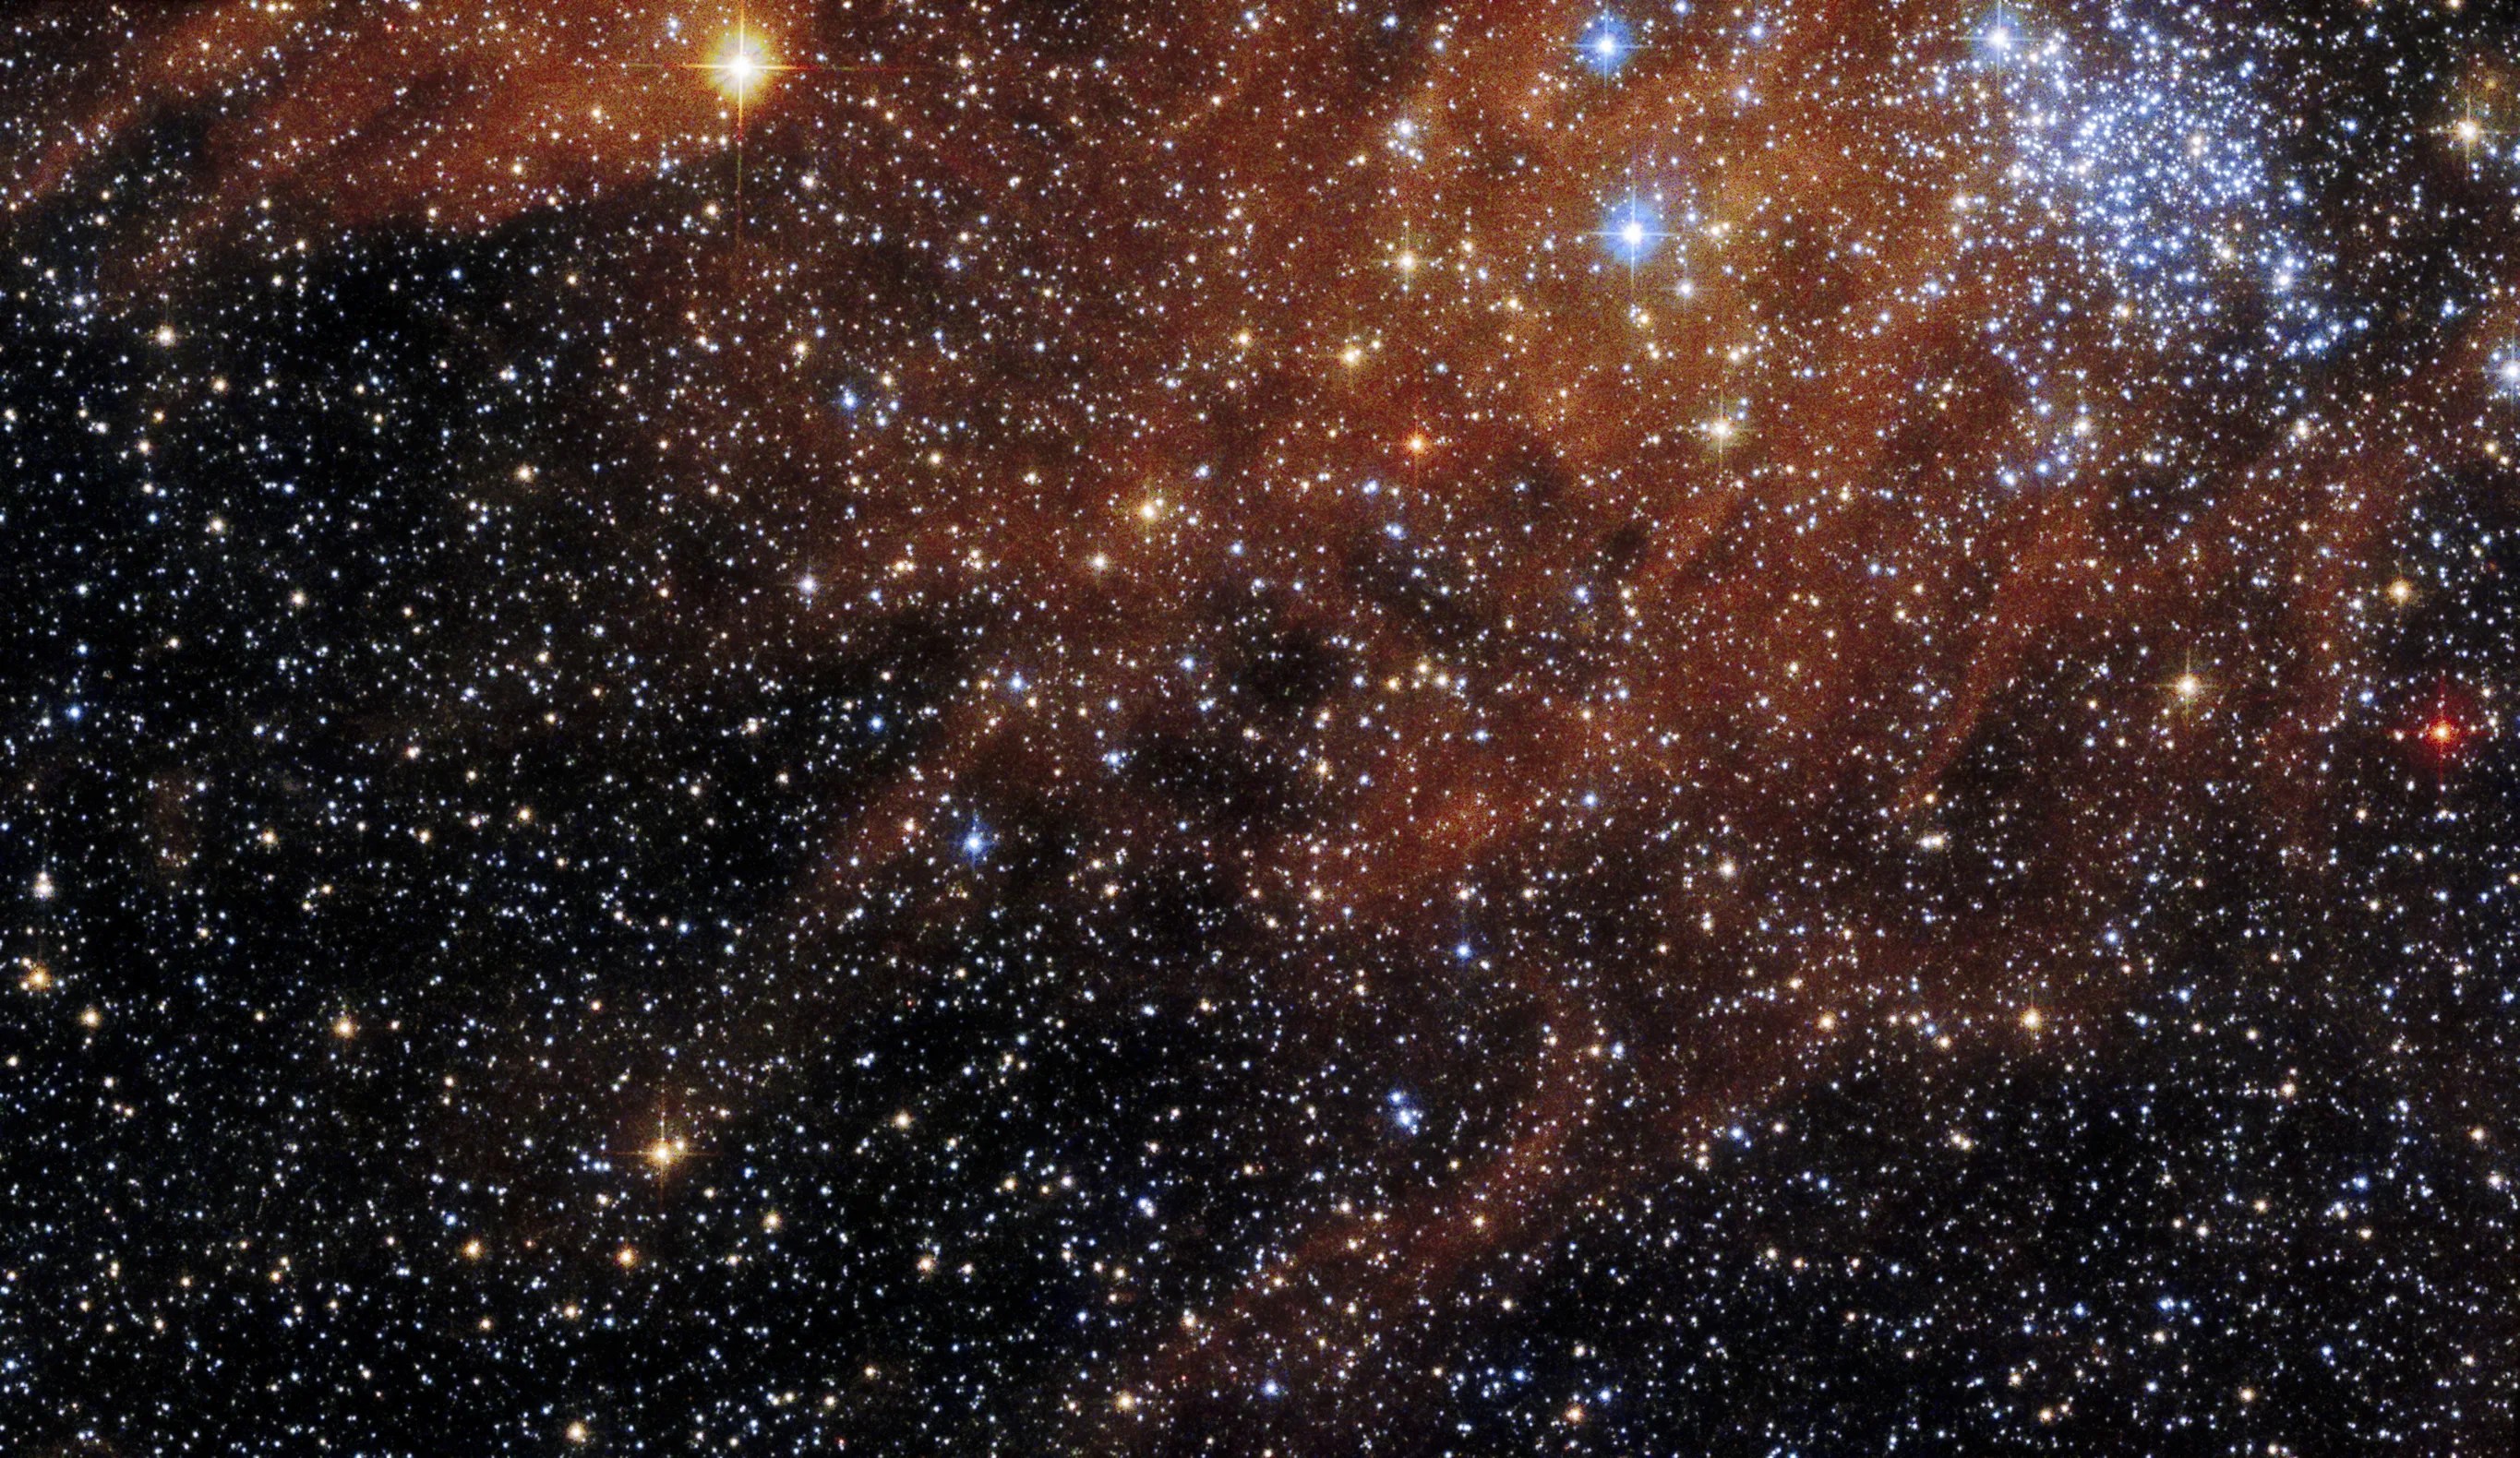 Bright blue-white cluster of stars at upper right, surrounded by field of dimmer stars and rusty-red gas and dust clouds